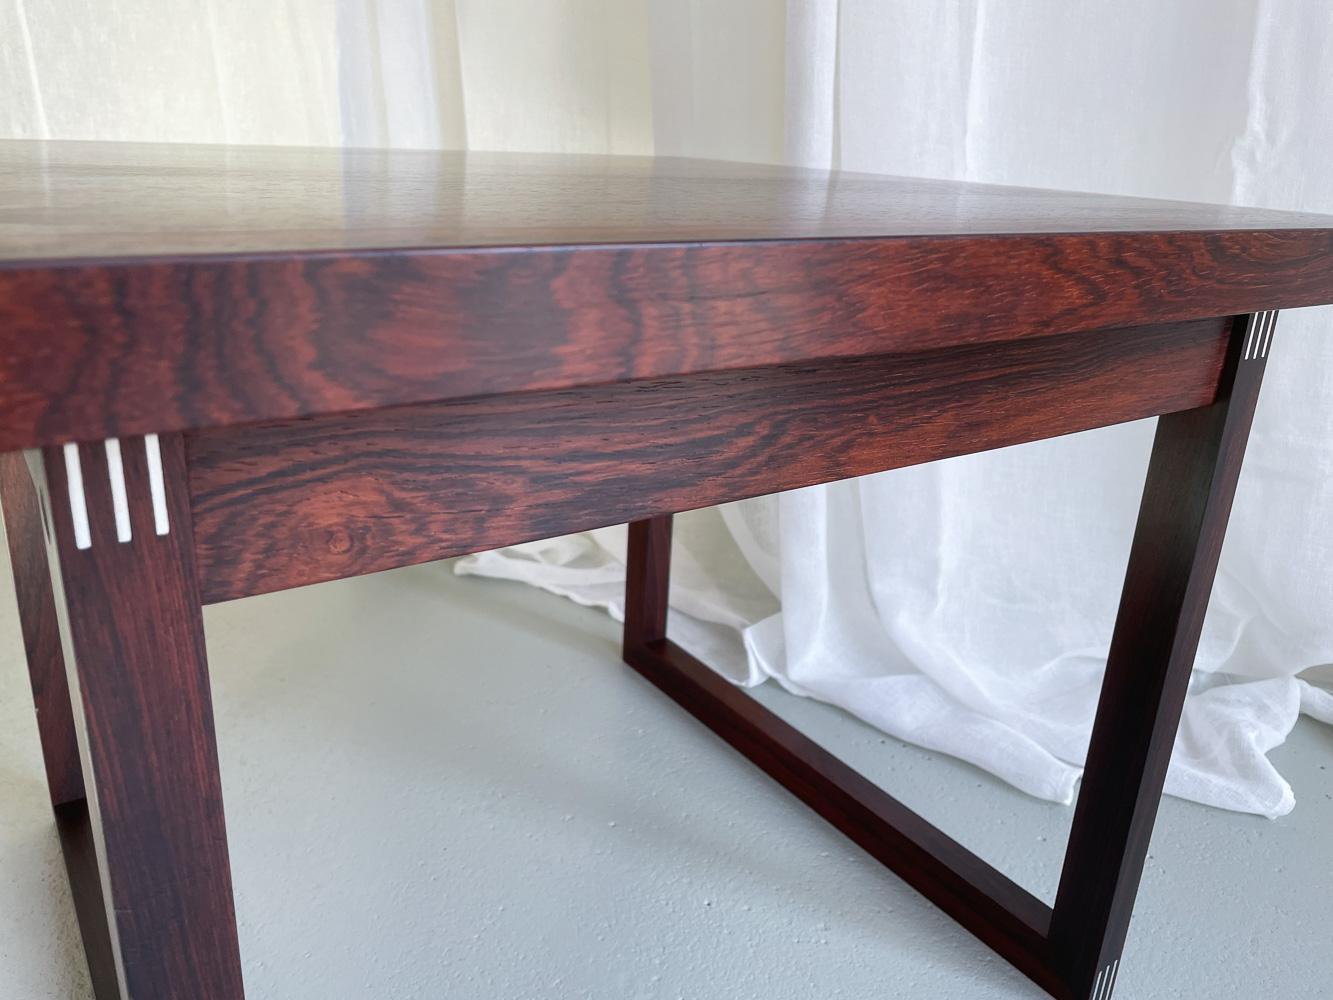 Danish Modern Rosewood Side Table by Rud Thygesen for Heltborg Møbler, 1960s. In Good Condition For Sale In Asaa, DK